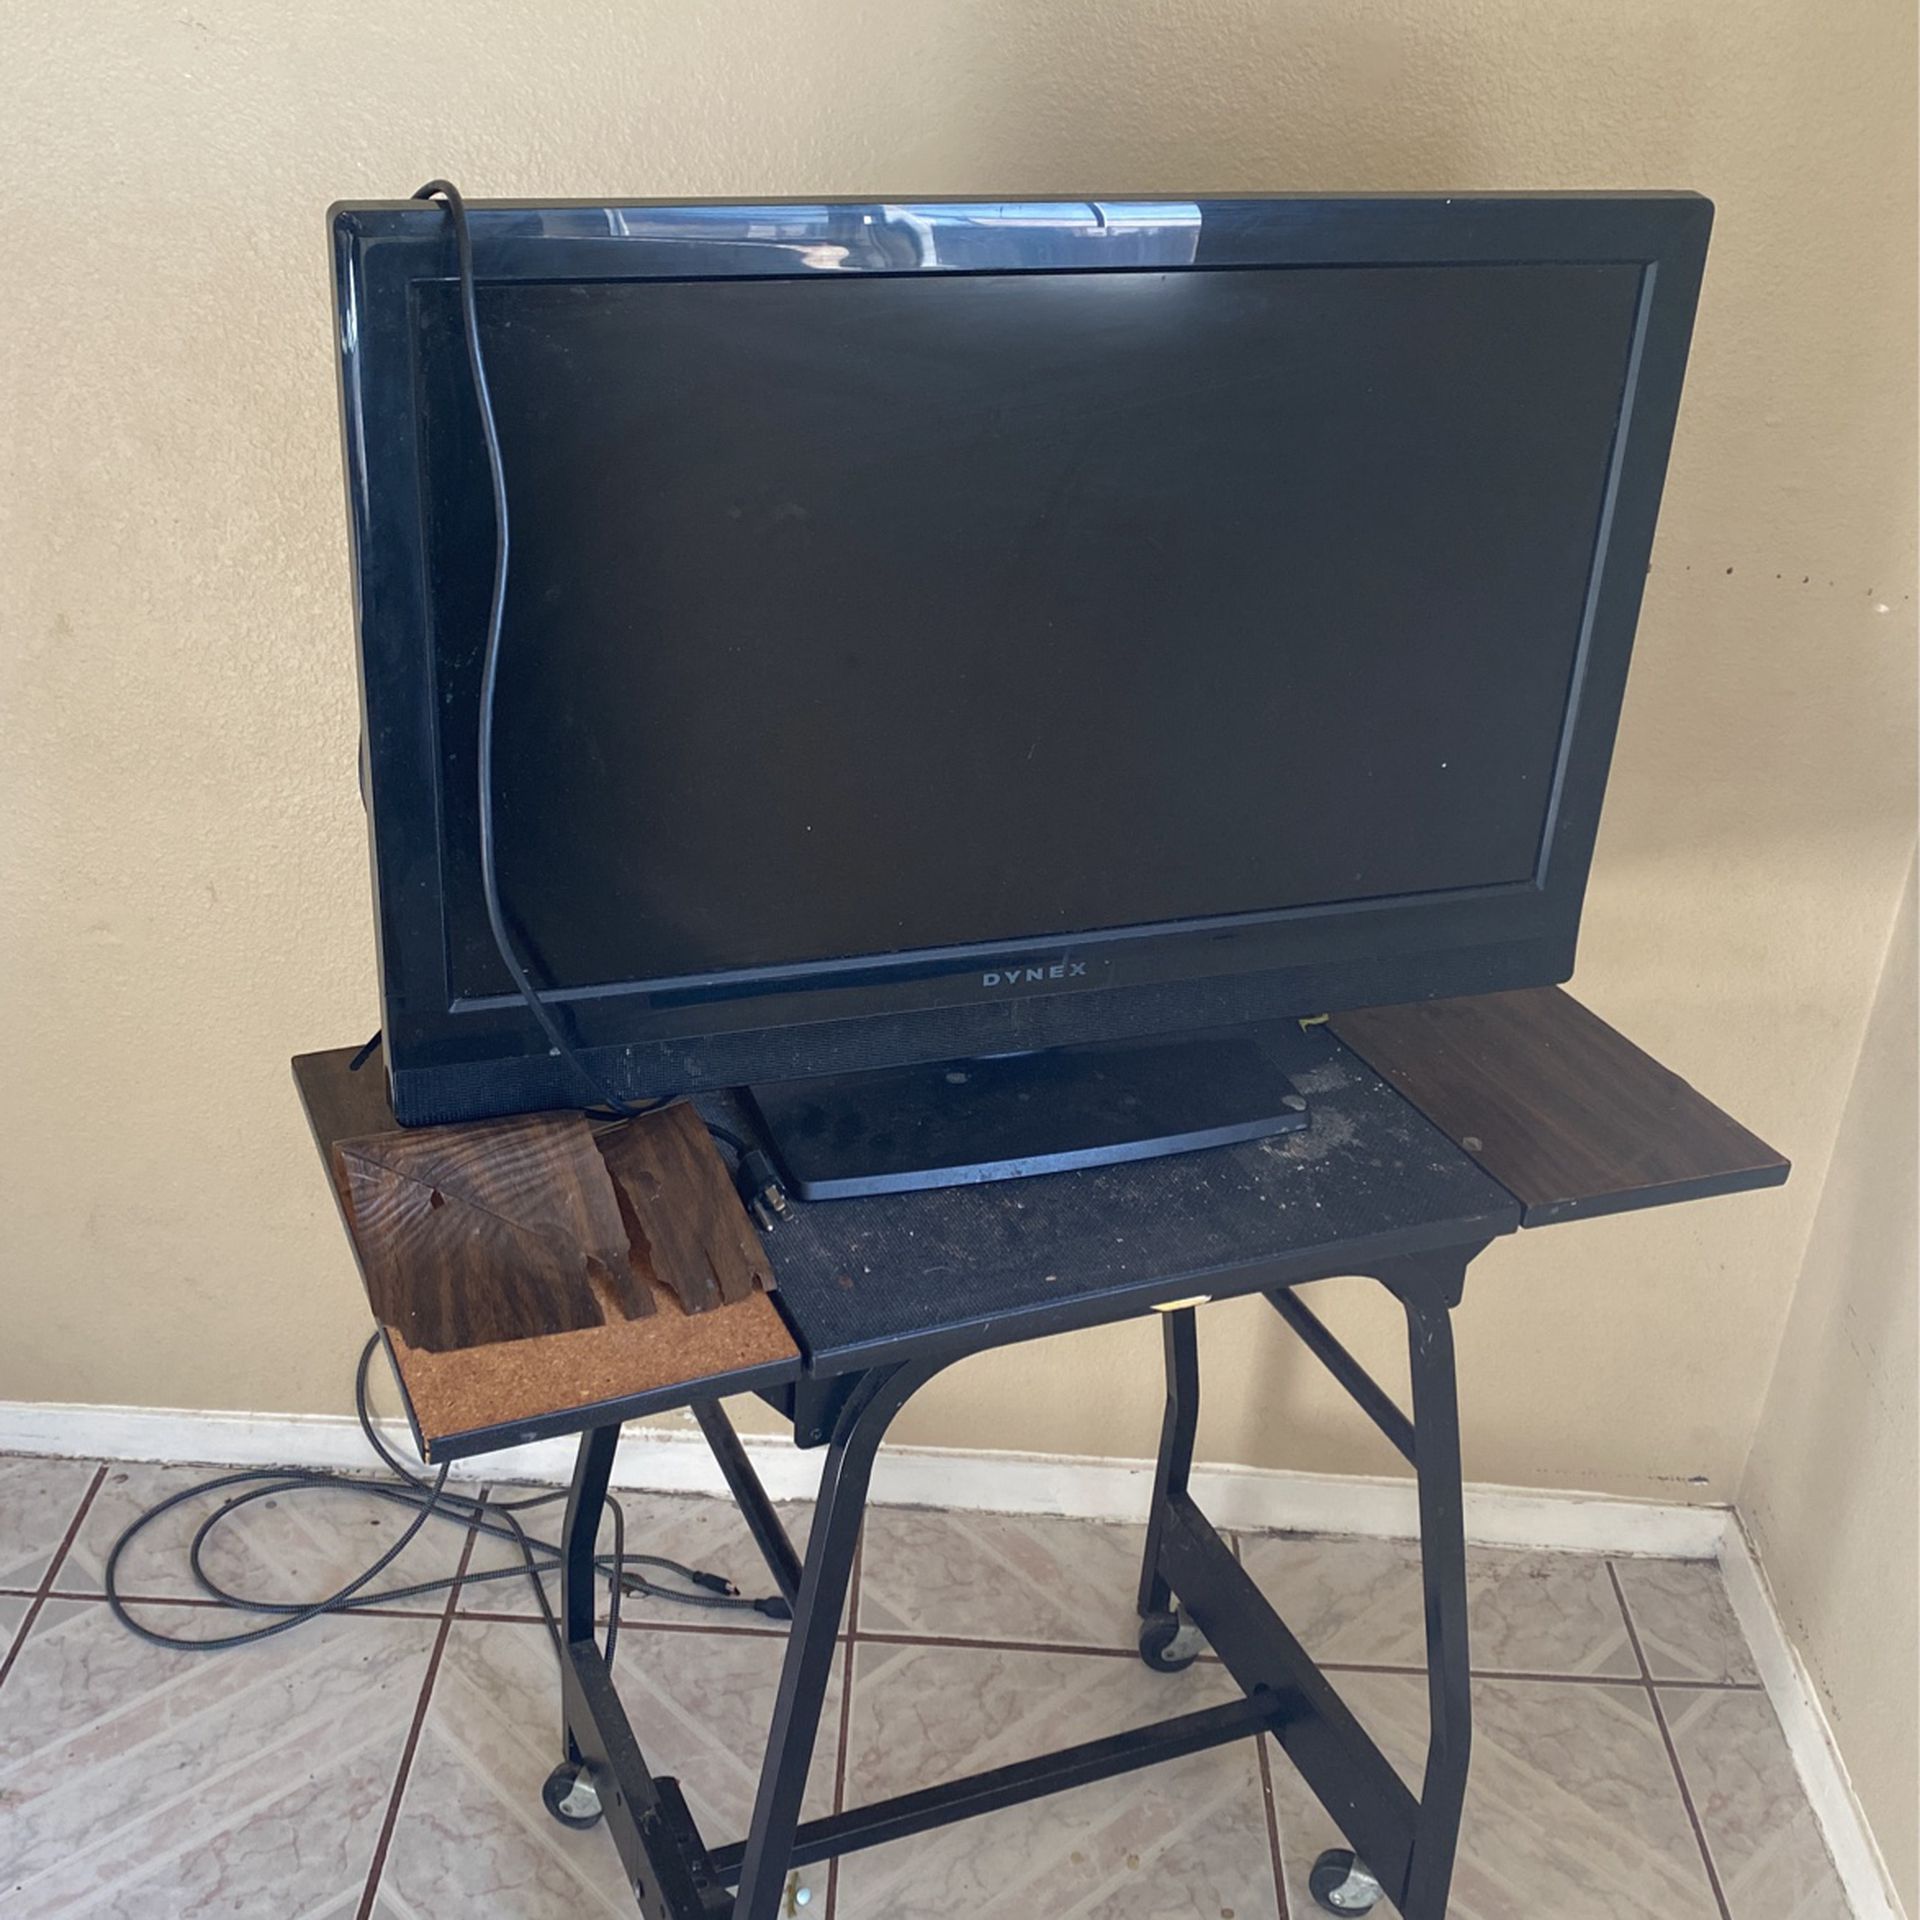 32” Tv With Table desk Stand  LCD Monitor 